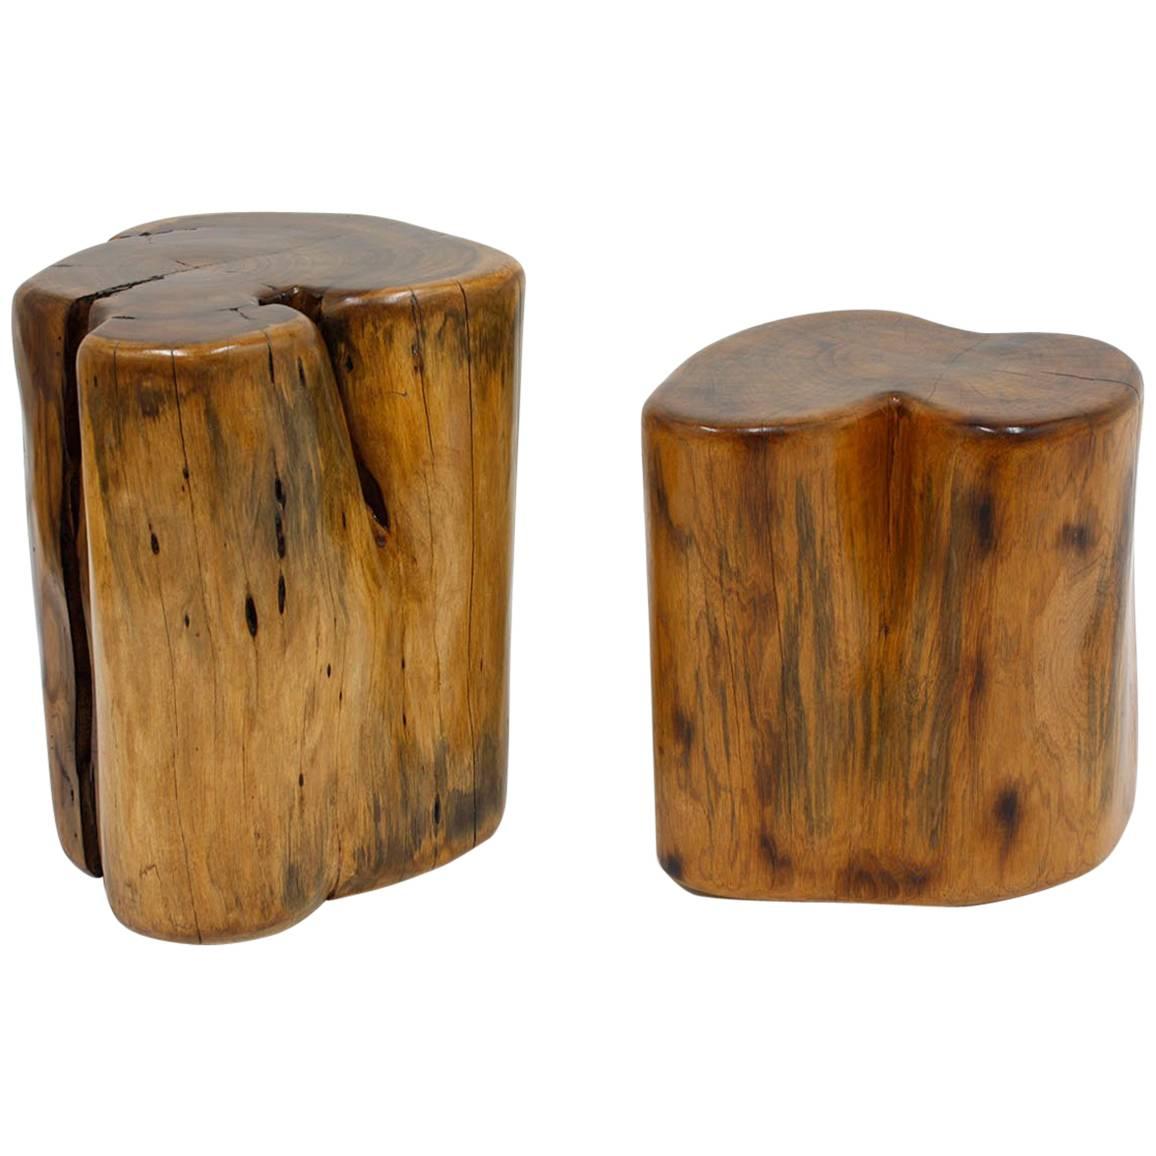 Pair of Organic Free-Form Wood Stump Side Tables or Stools